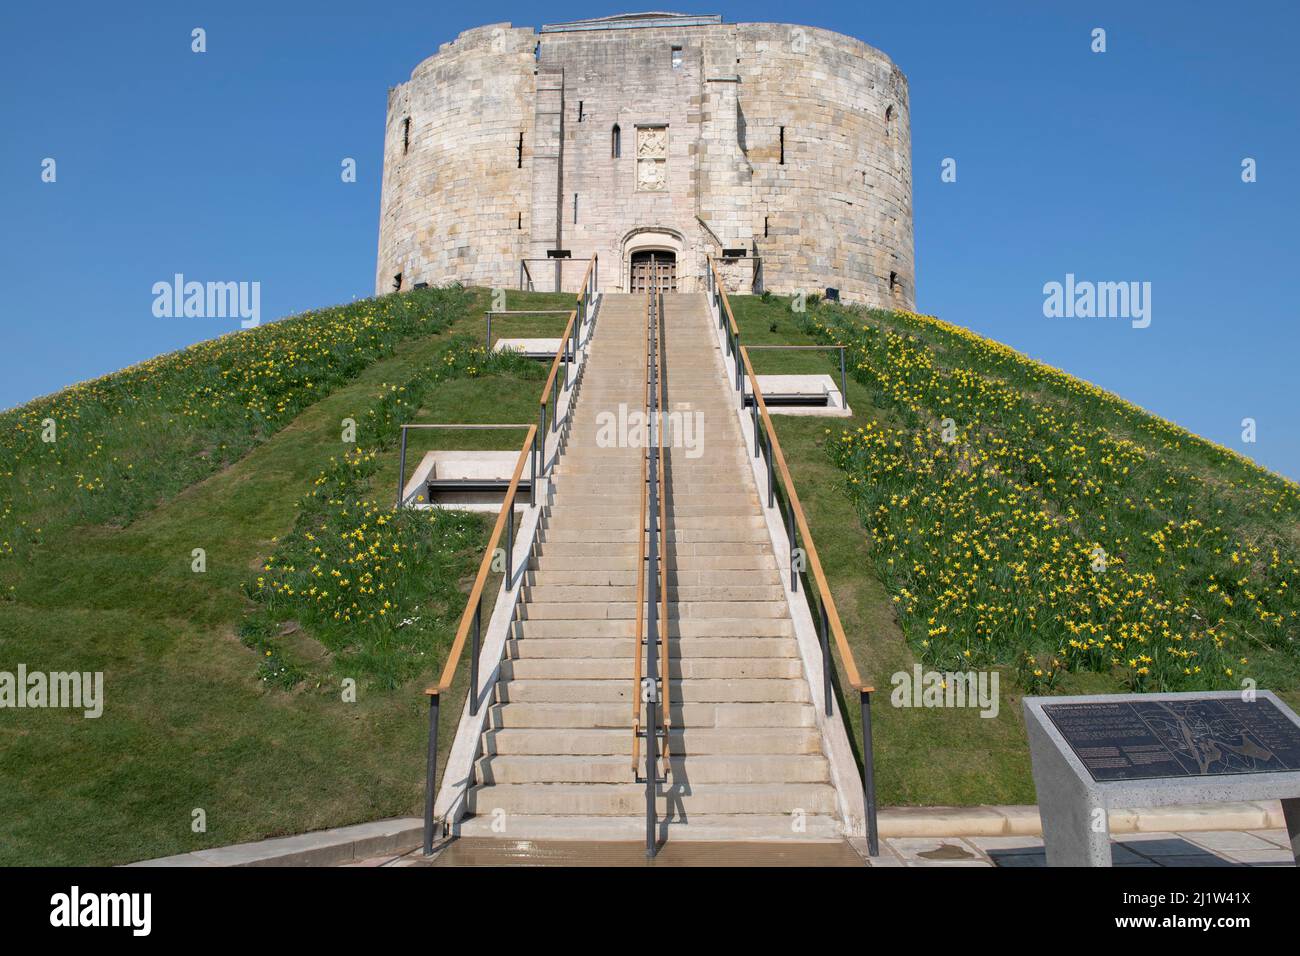 Clifford's Tower (York Castle) entrance in York surrounded by Daffodils in Spring. Stock Photo